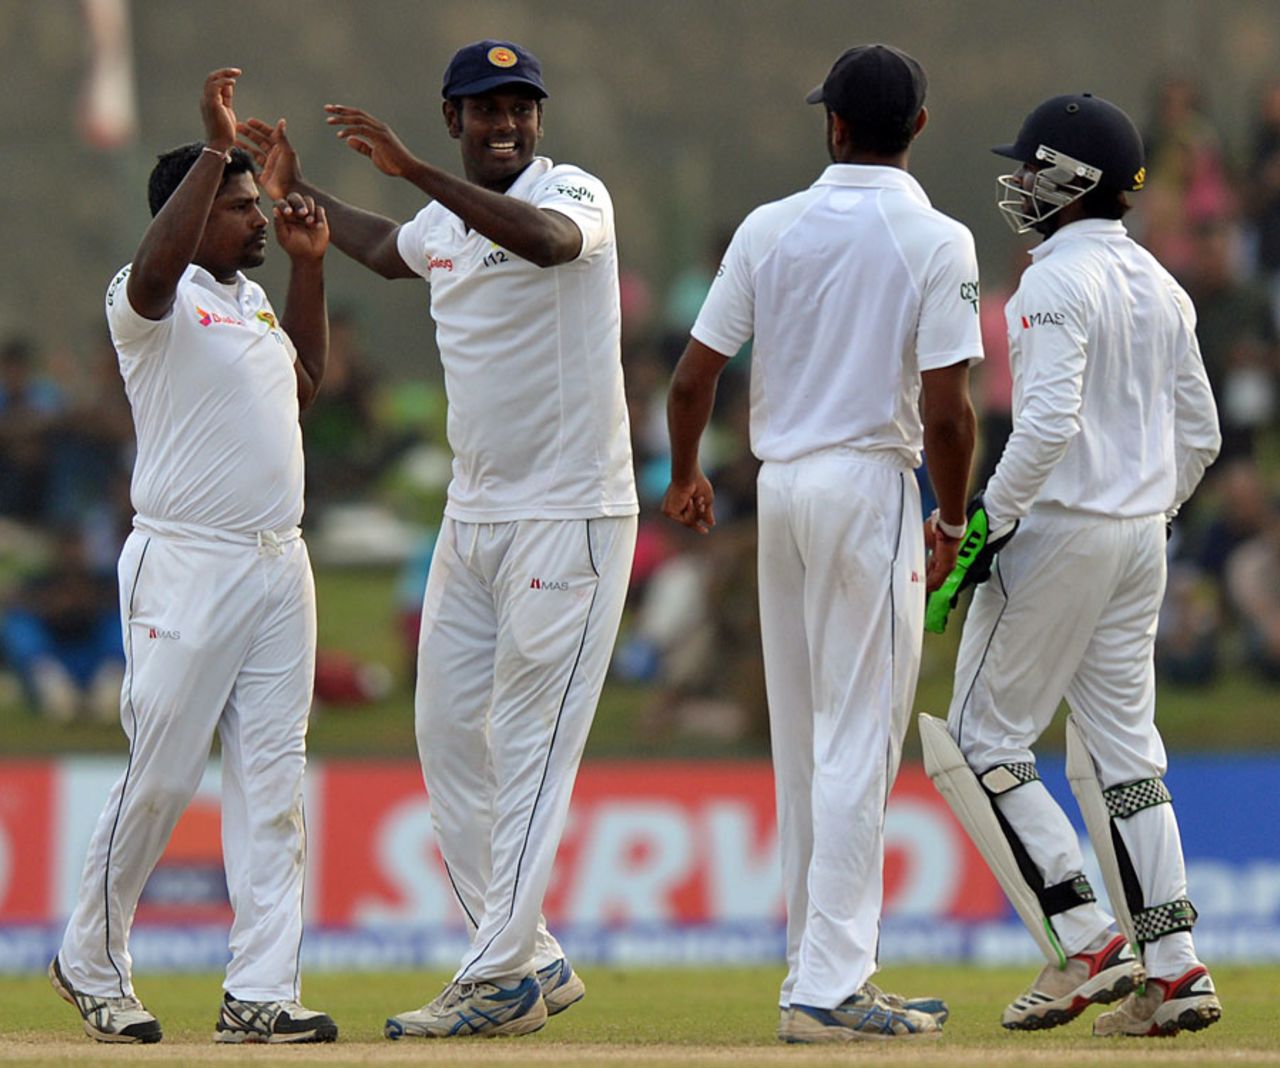 Rangana Herath dismissed Khurram Manzoor in the fourth over, Sri Lanka v Pakistan, 1st Test, Galle, 4th day, August 9, 2014